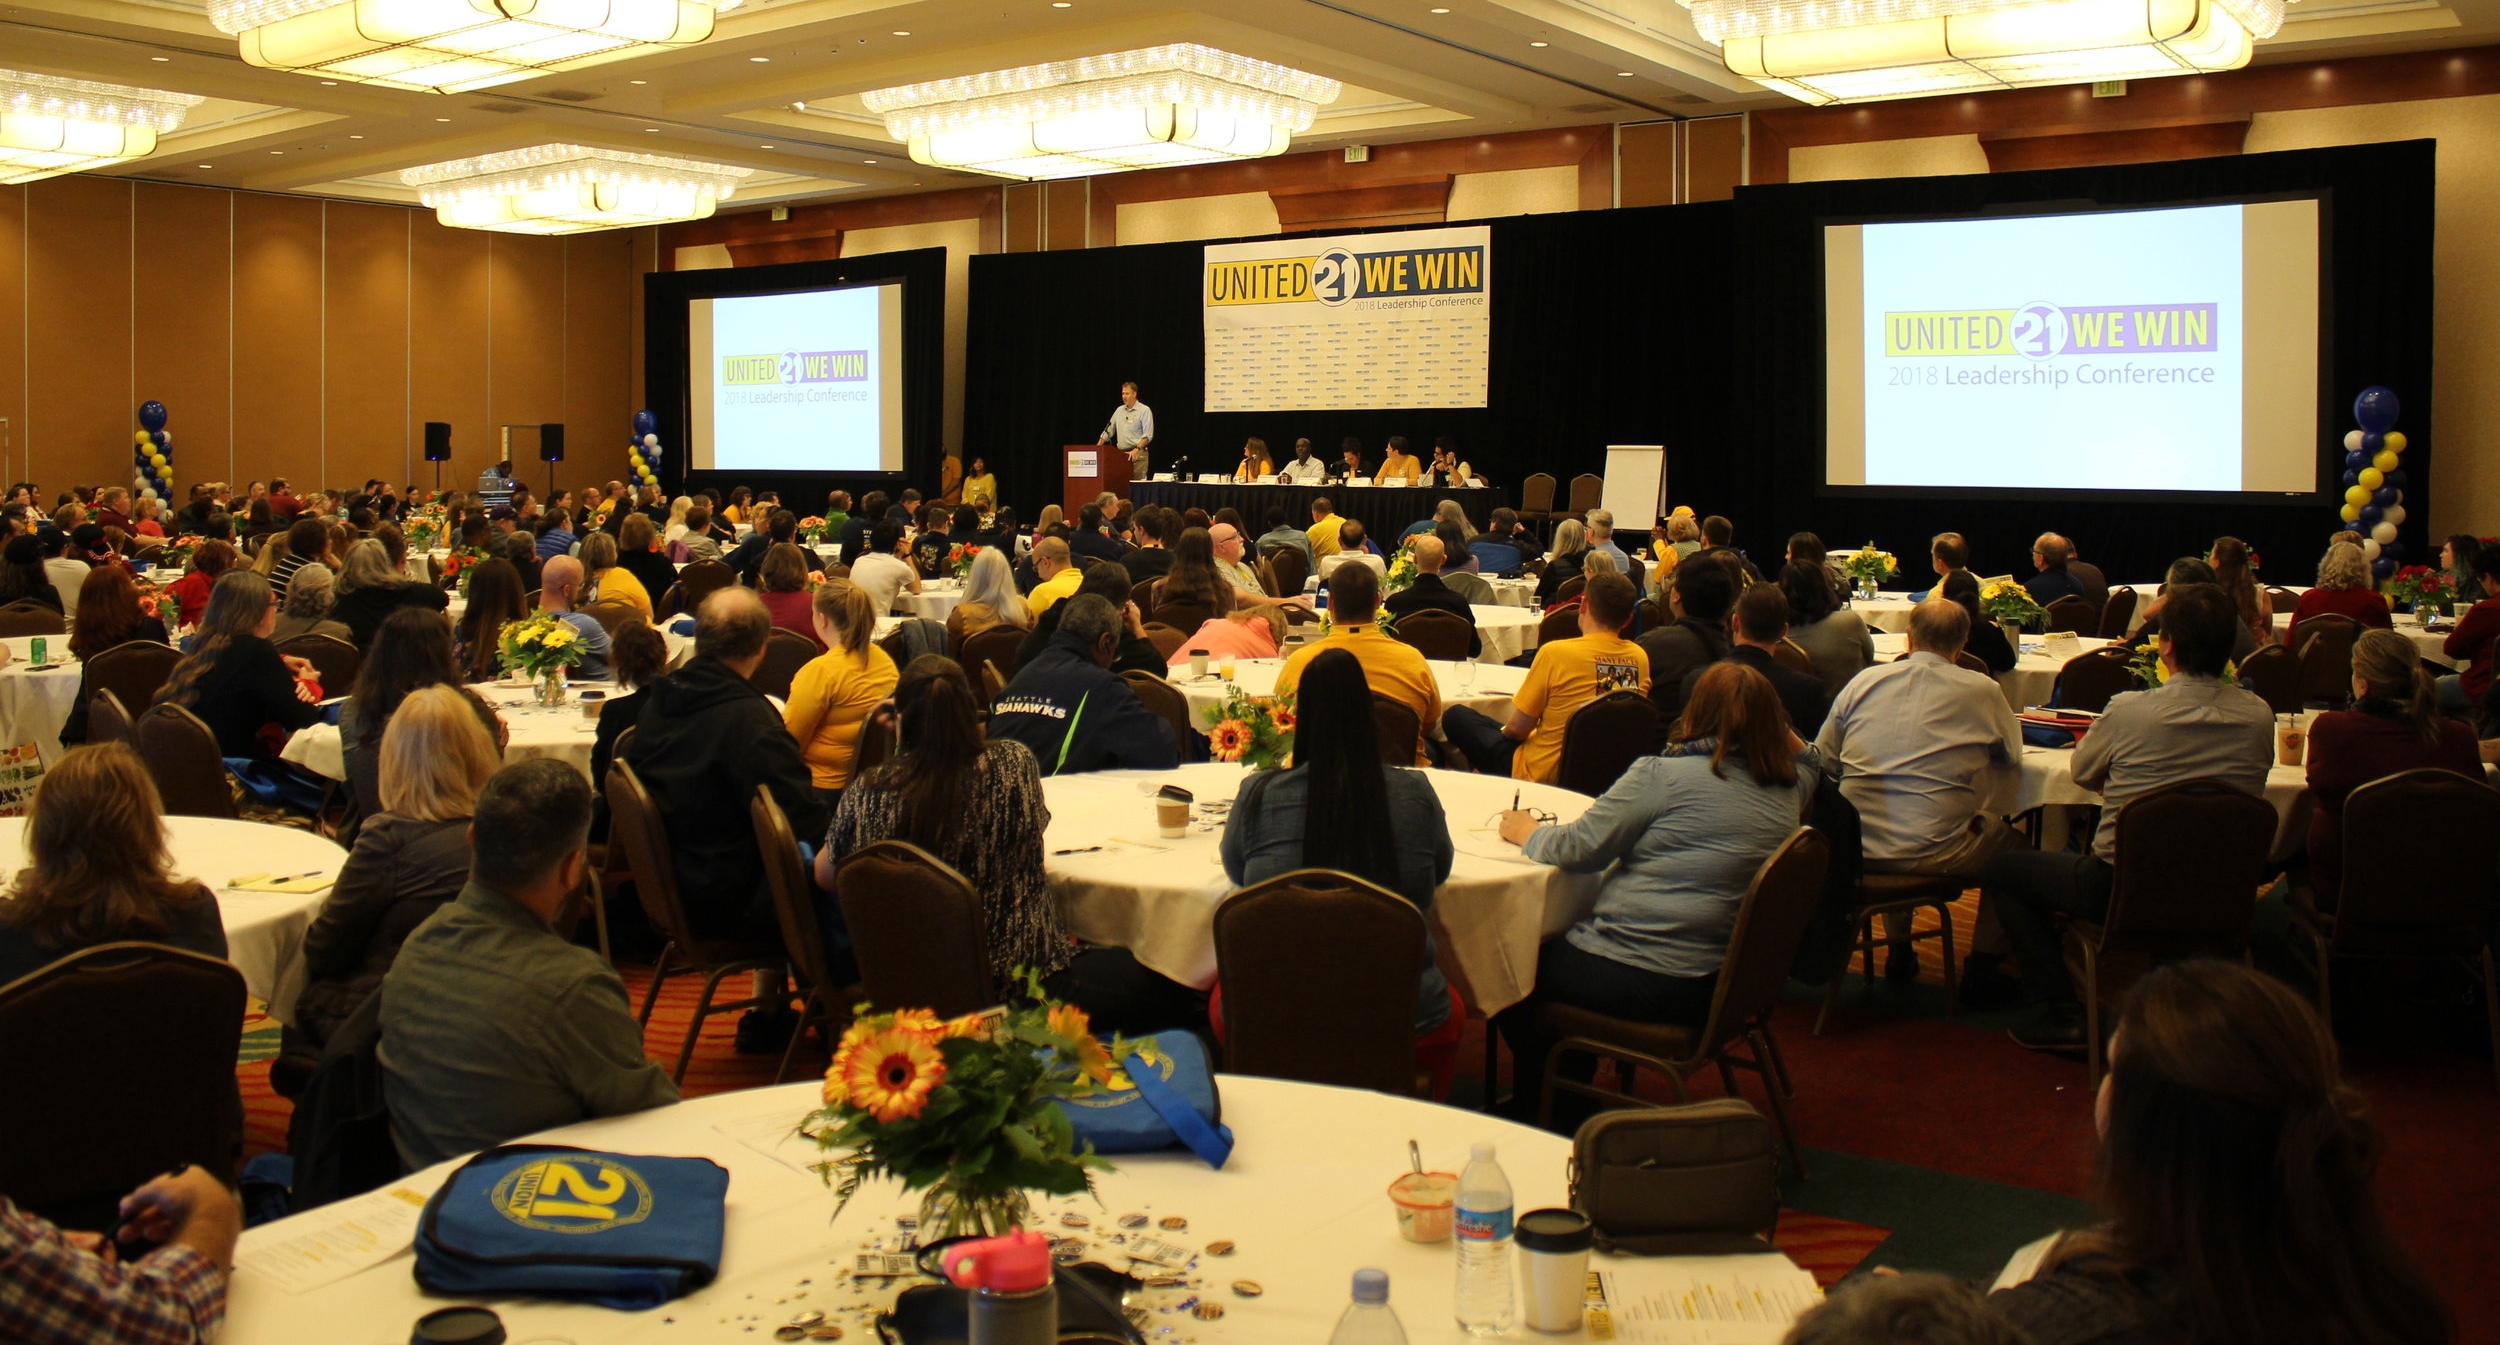 Nearly 300 workplace Leaders joined together for the conference.